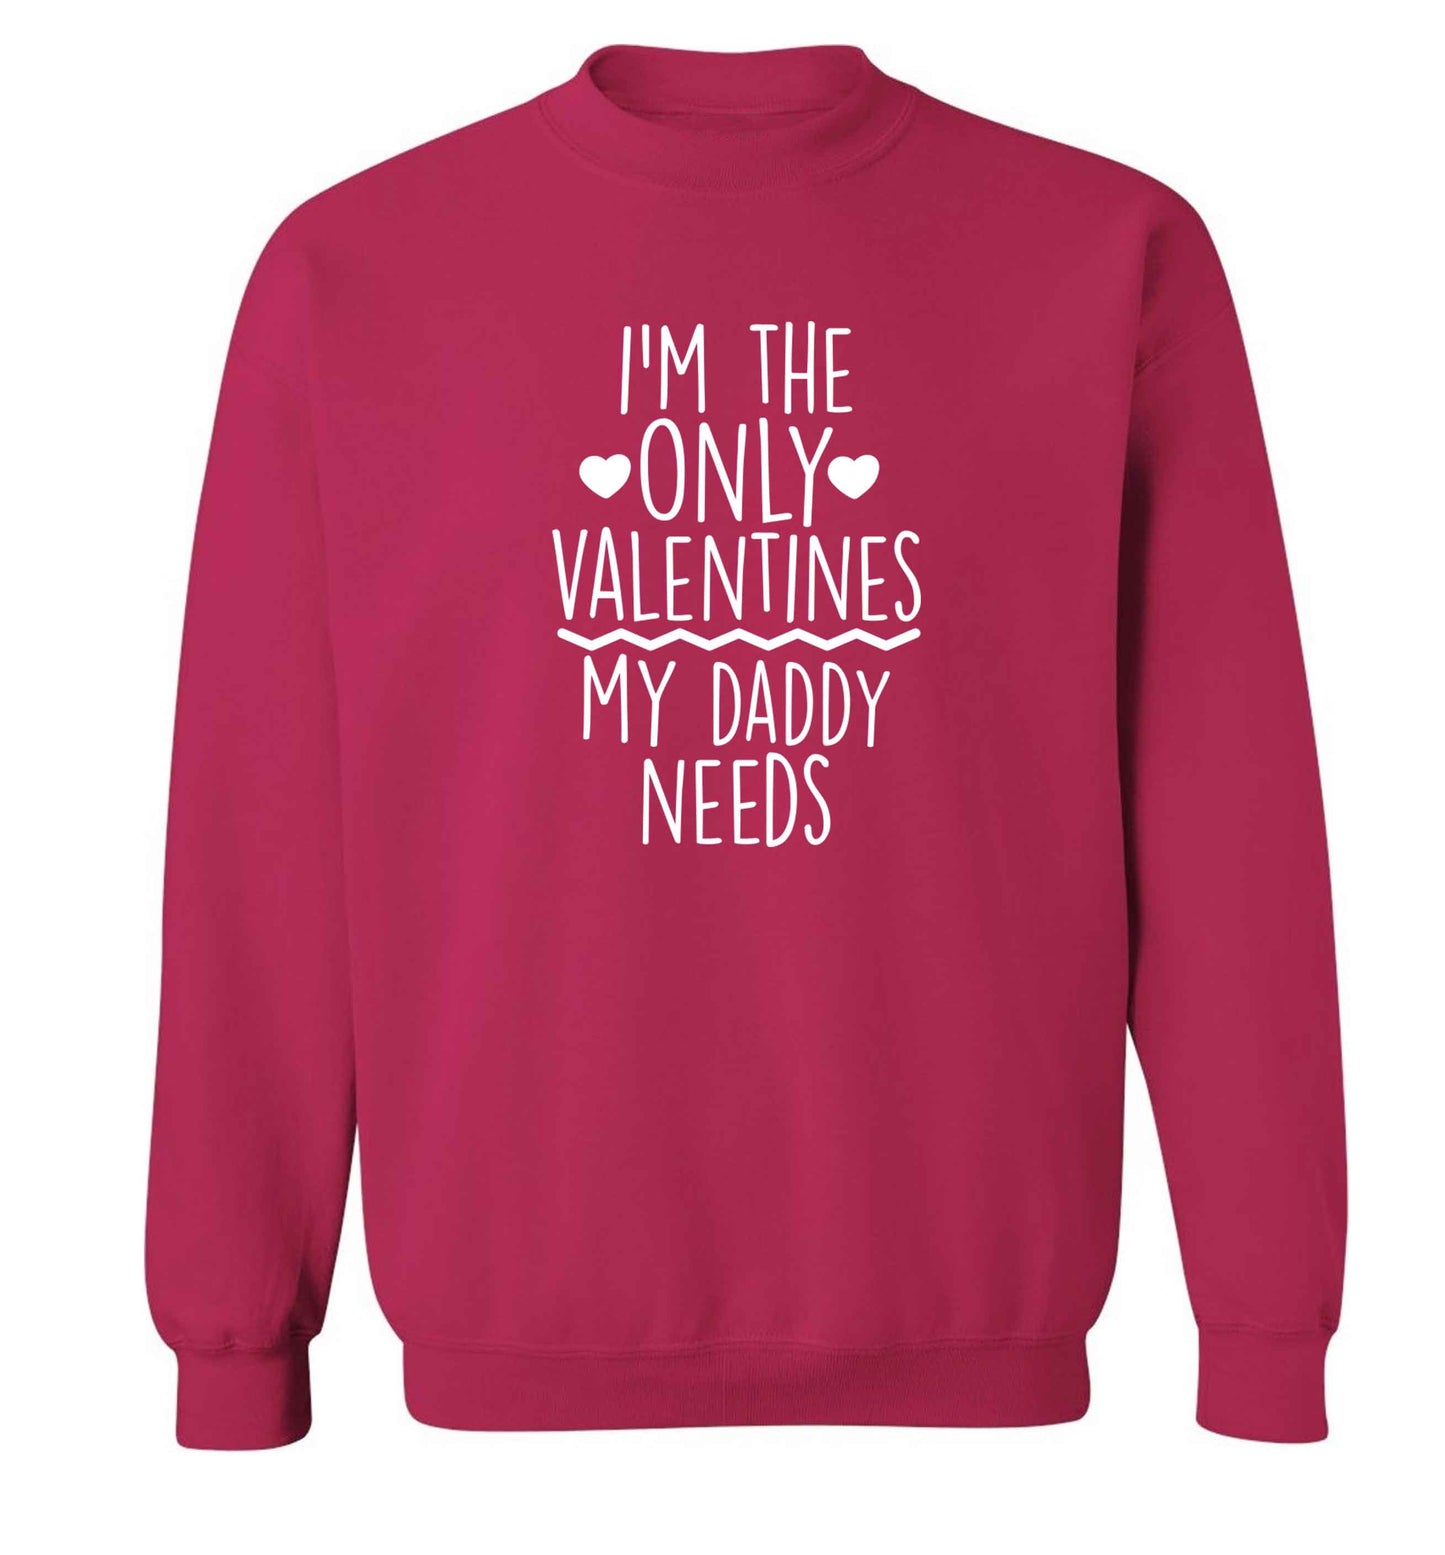 I'm the only valentines my daddy needs adult's unisex pink sweater 2XL